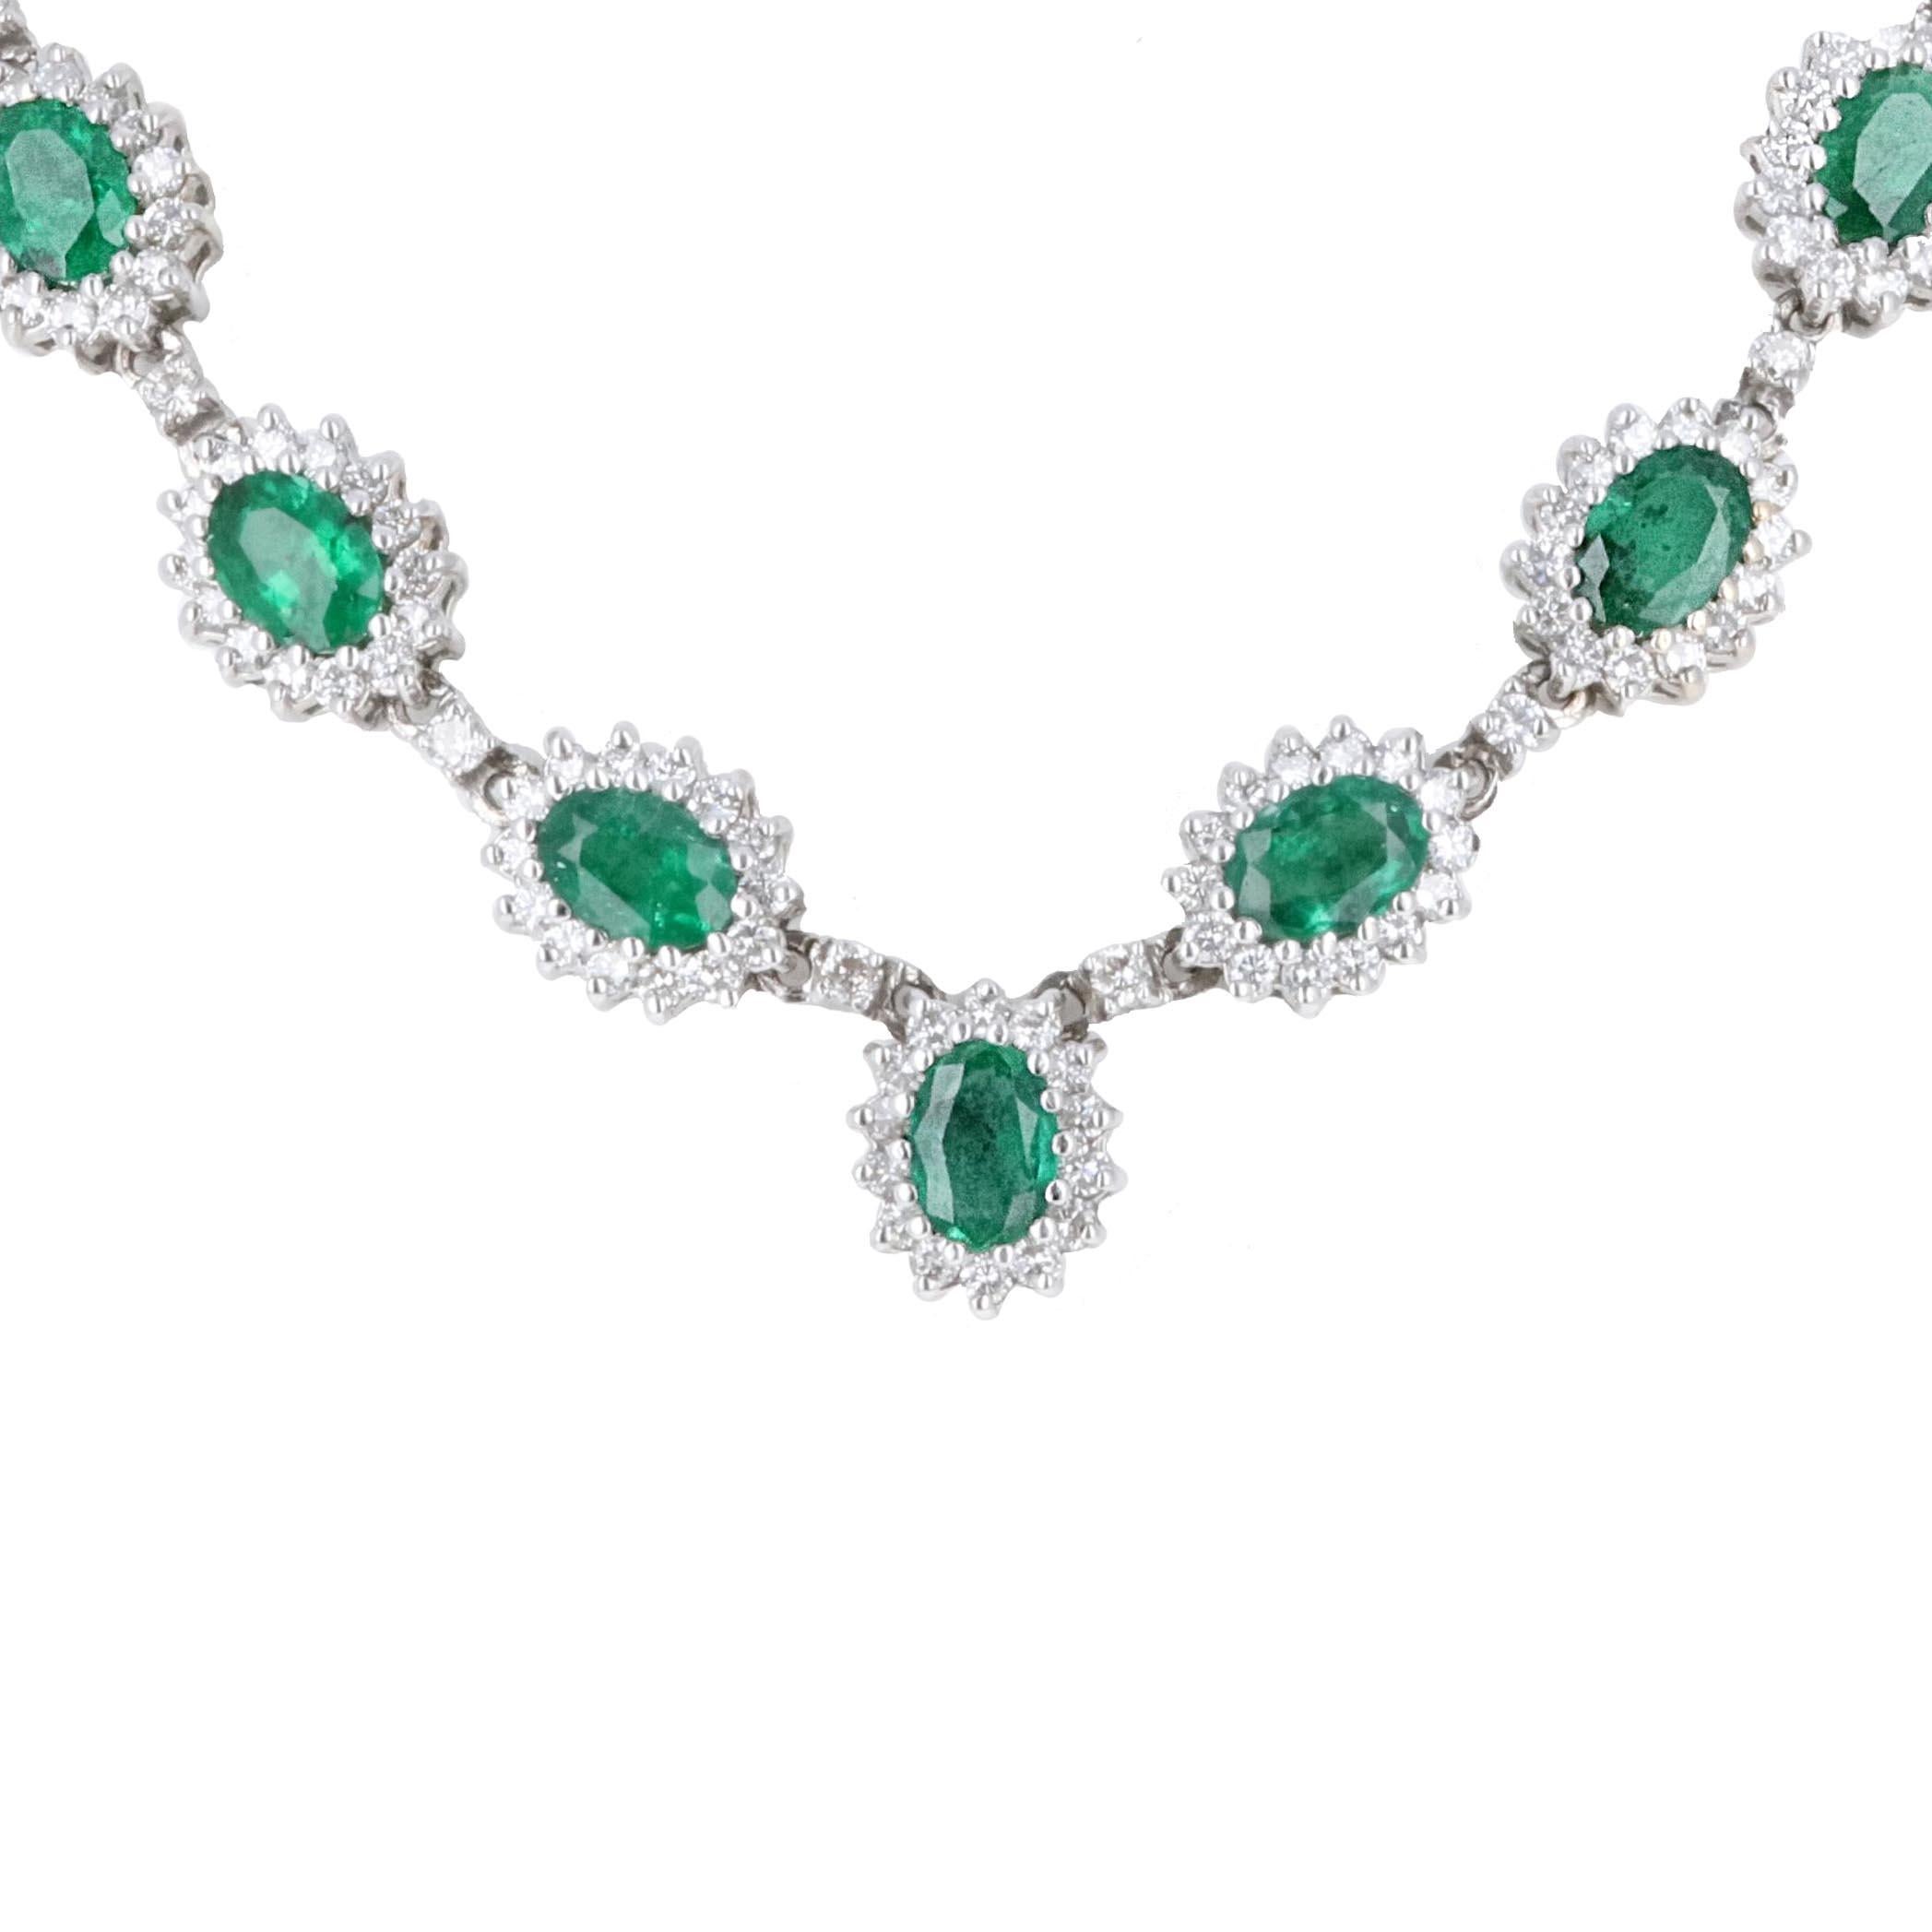 18 karat white gold diamond and emerald drop necklace. There are 11 emeralds with an estimated total weight of 11 carats, making each emerald around 1 carat.  Diamonds surround and adorn the oval cut emeralds. The diamond halo around each emerald